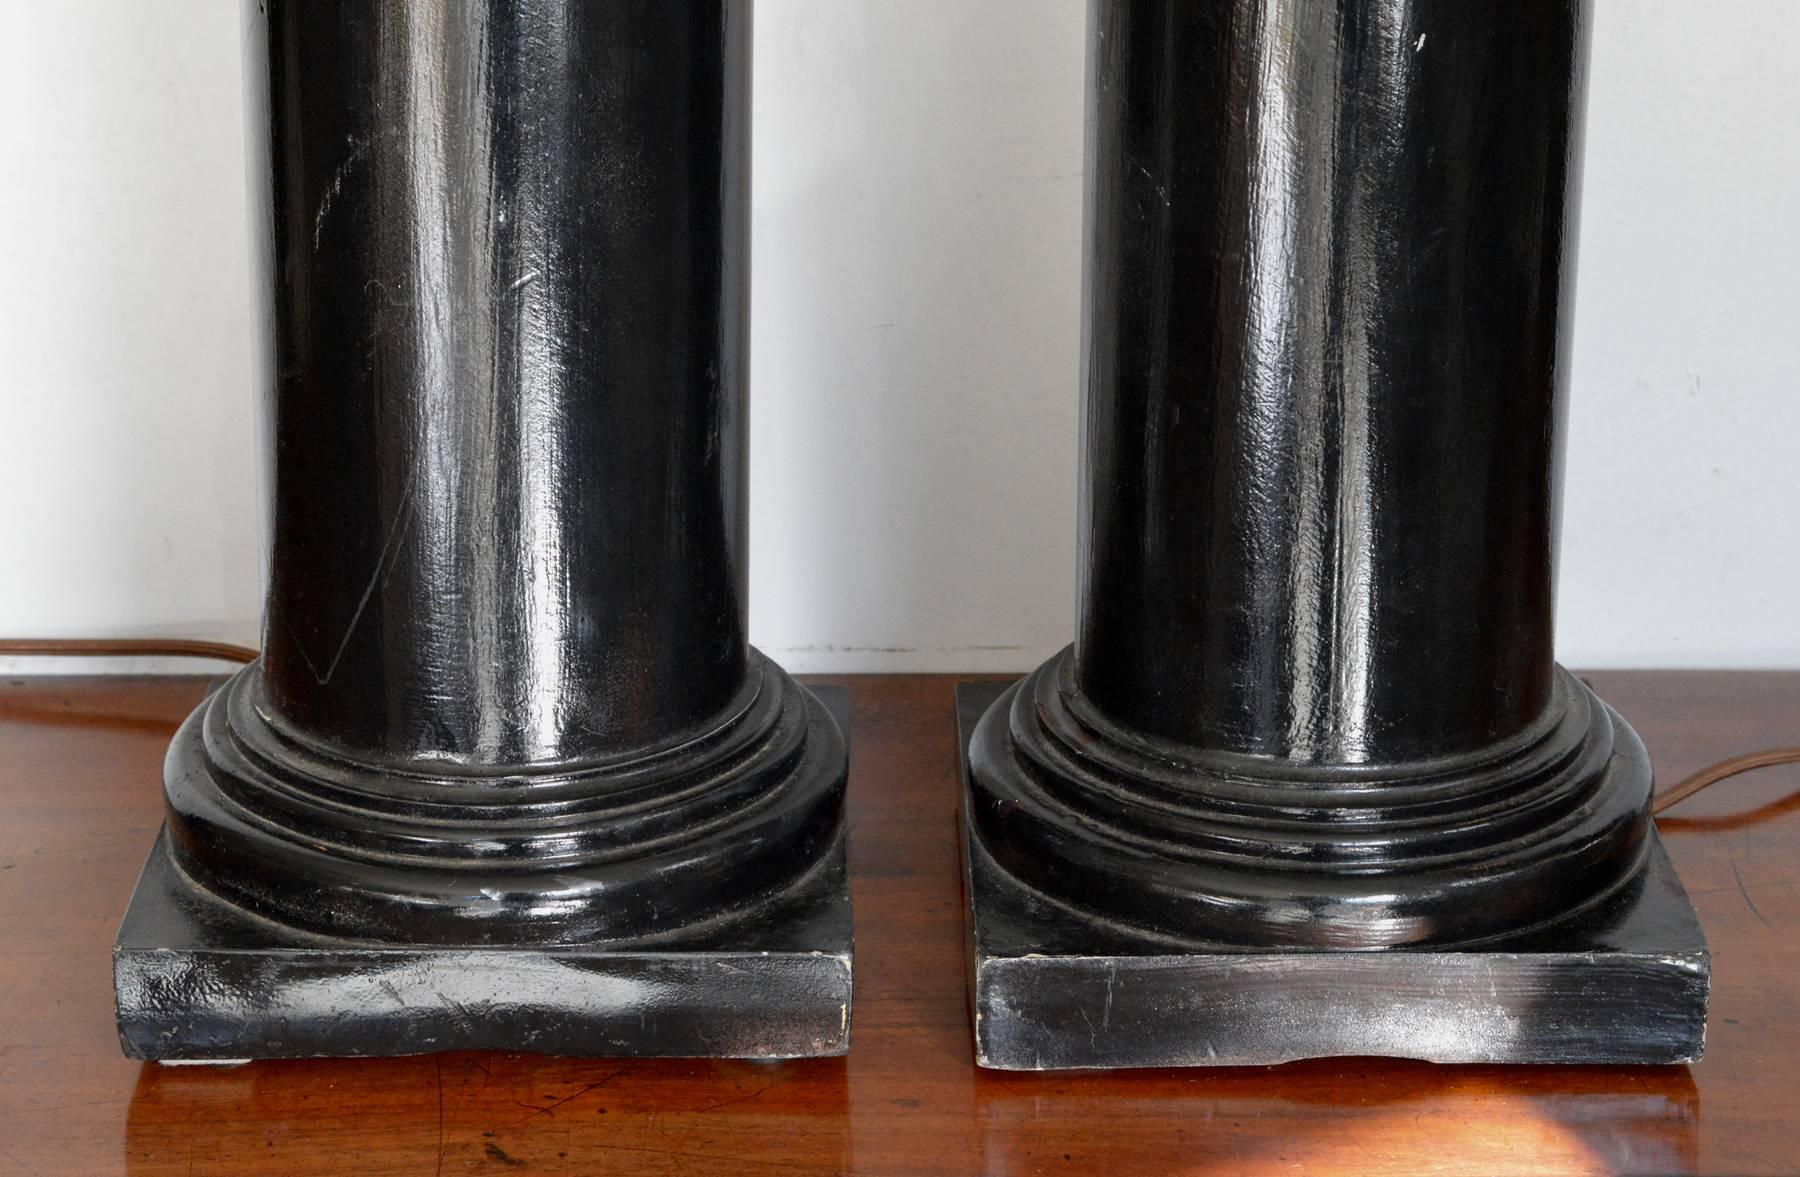 Ebonized Architectural Column Lamps, Pair In Good Condition For Sale In Charlottesville, VA